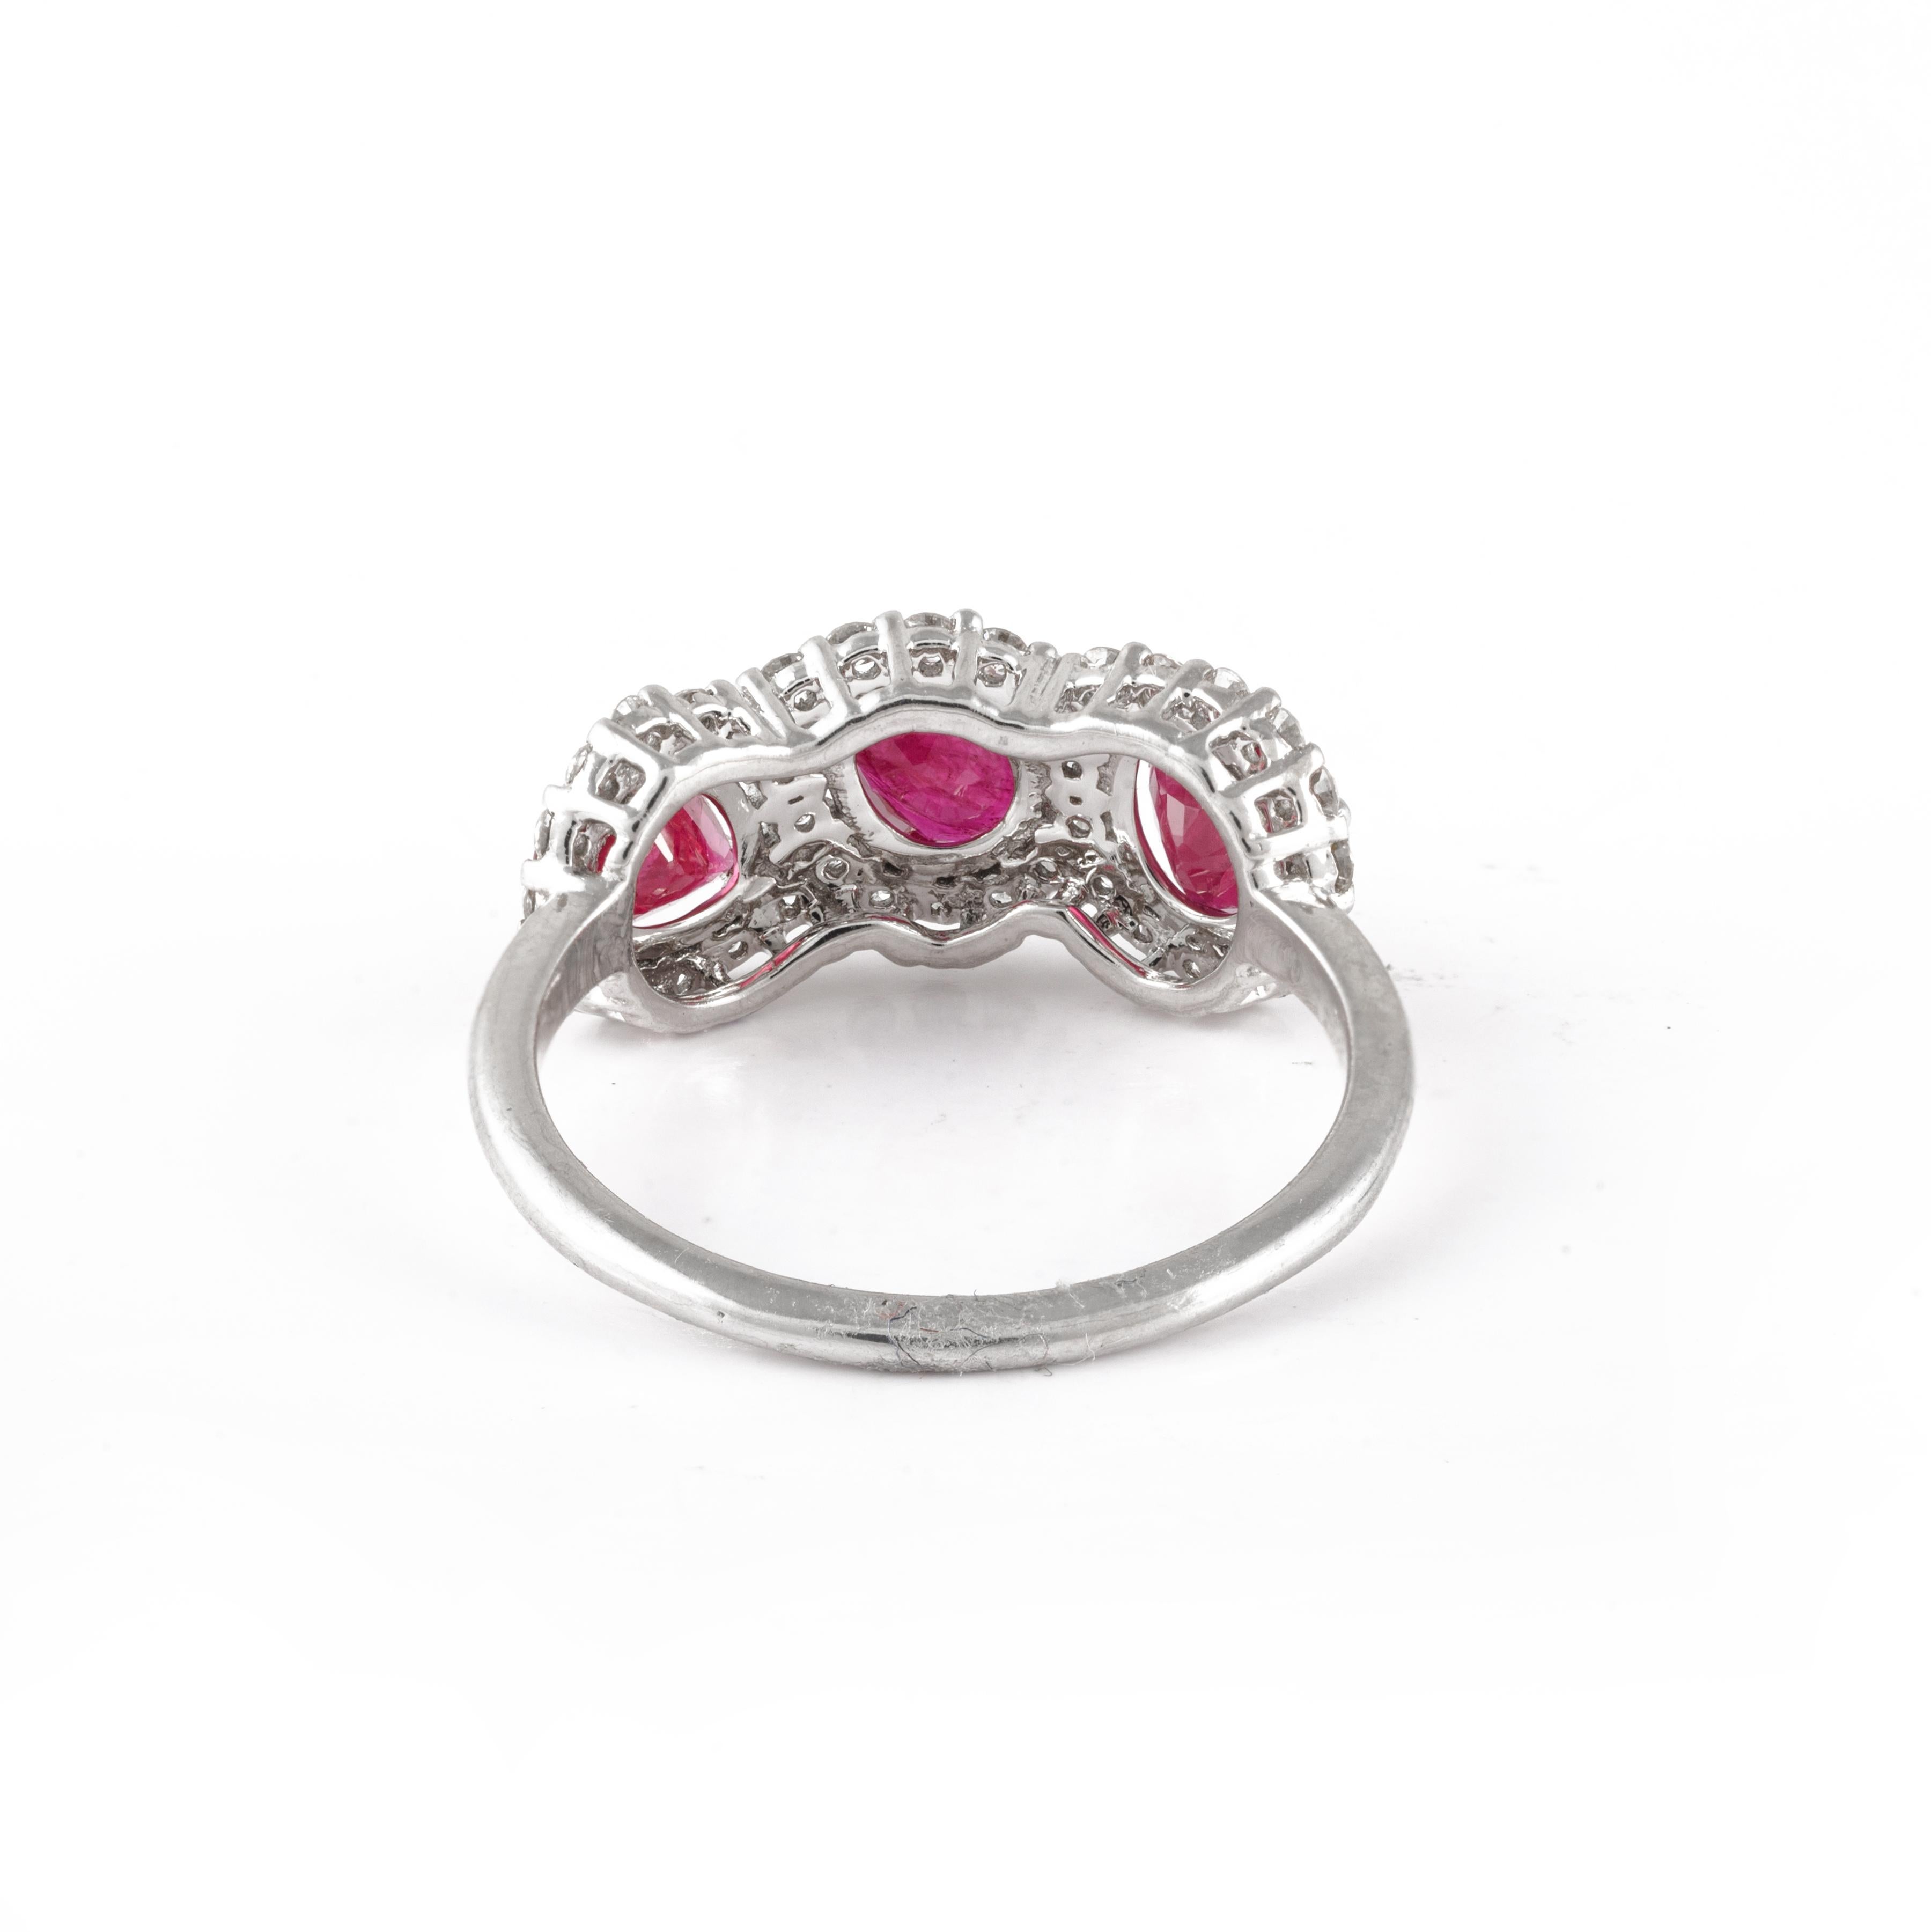 For Sale:  Three Stone Real Ruby Engagement Ring in 18k Solid White Gold with Diamonds 6